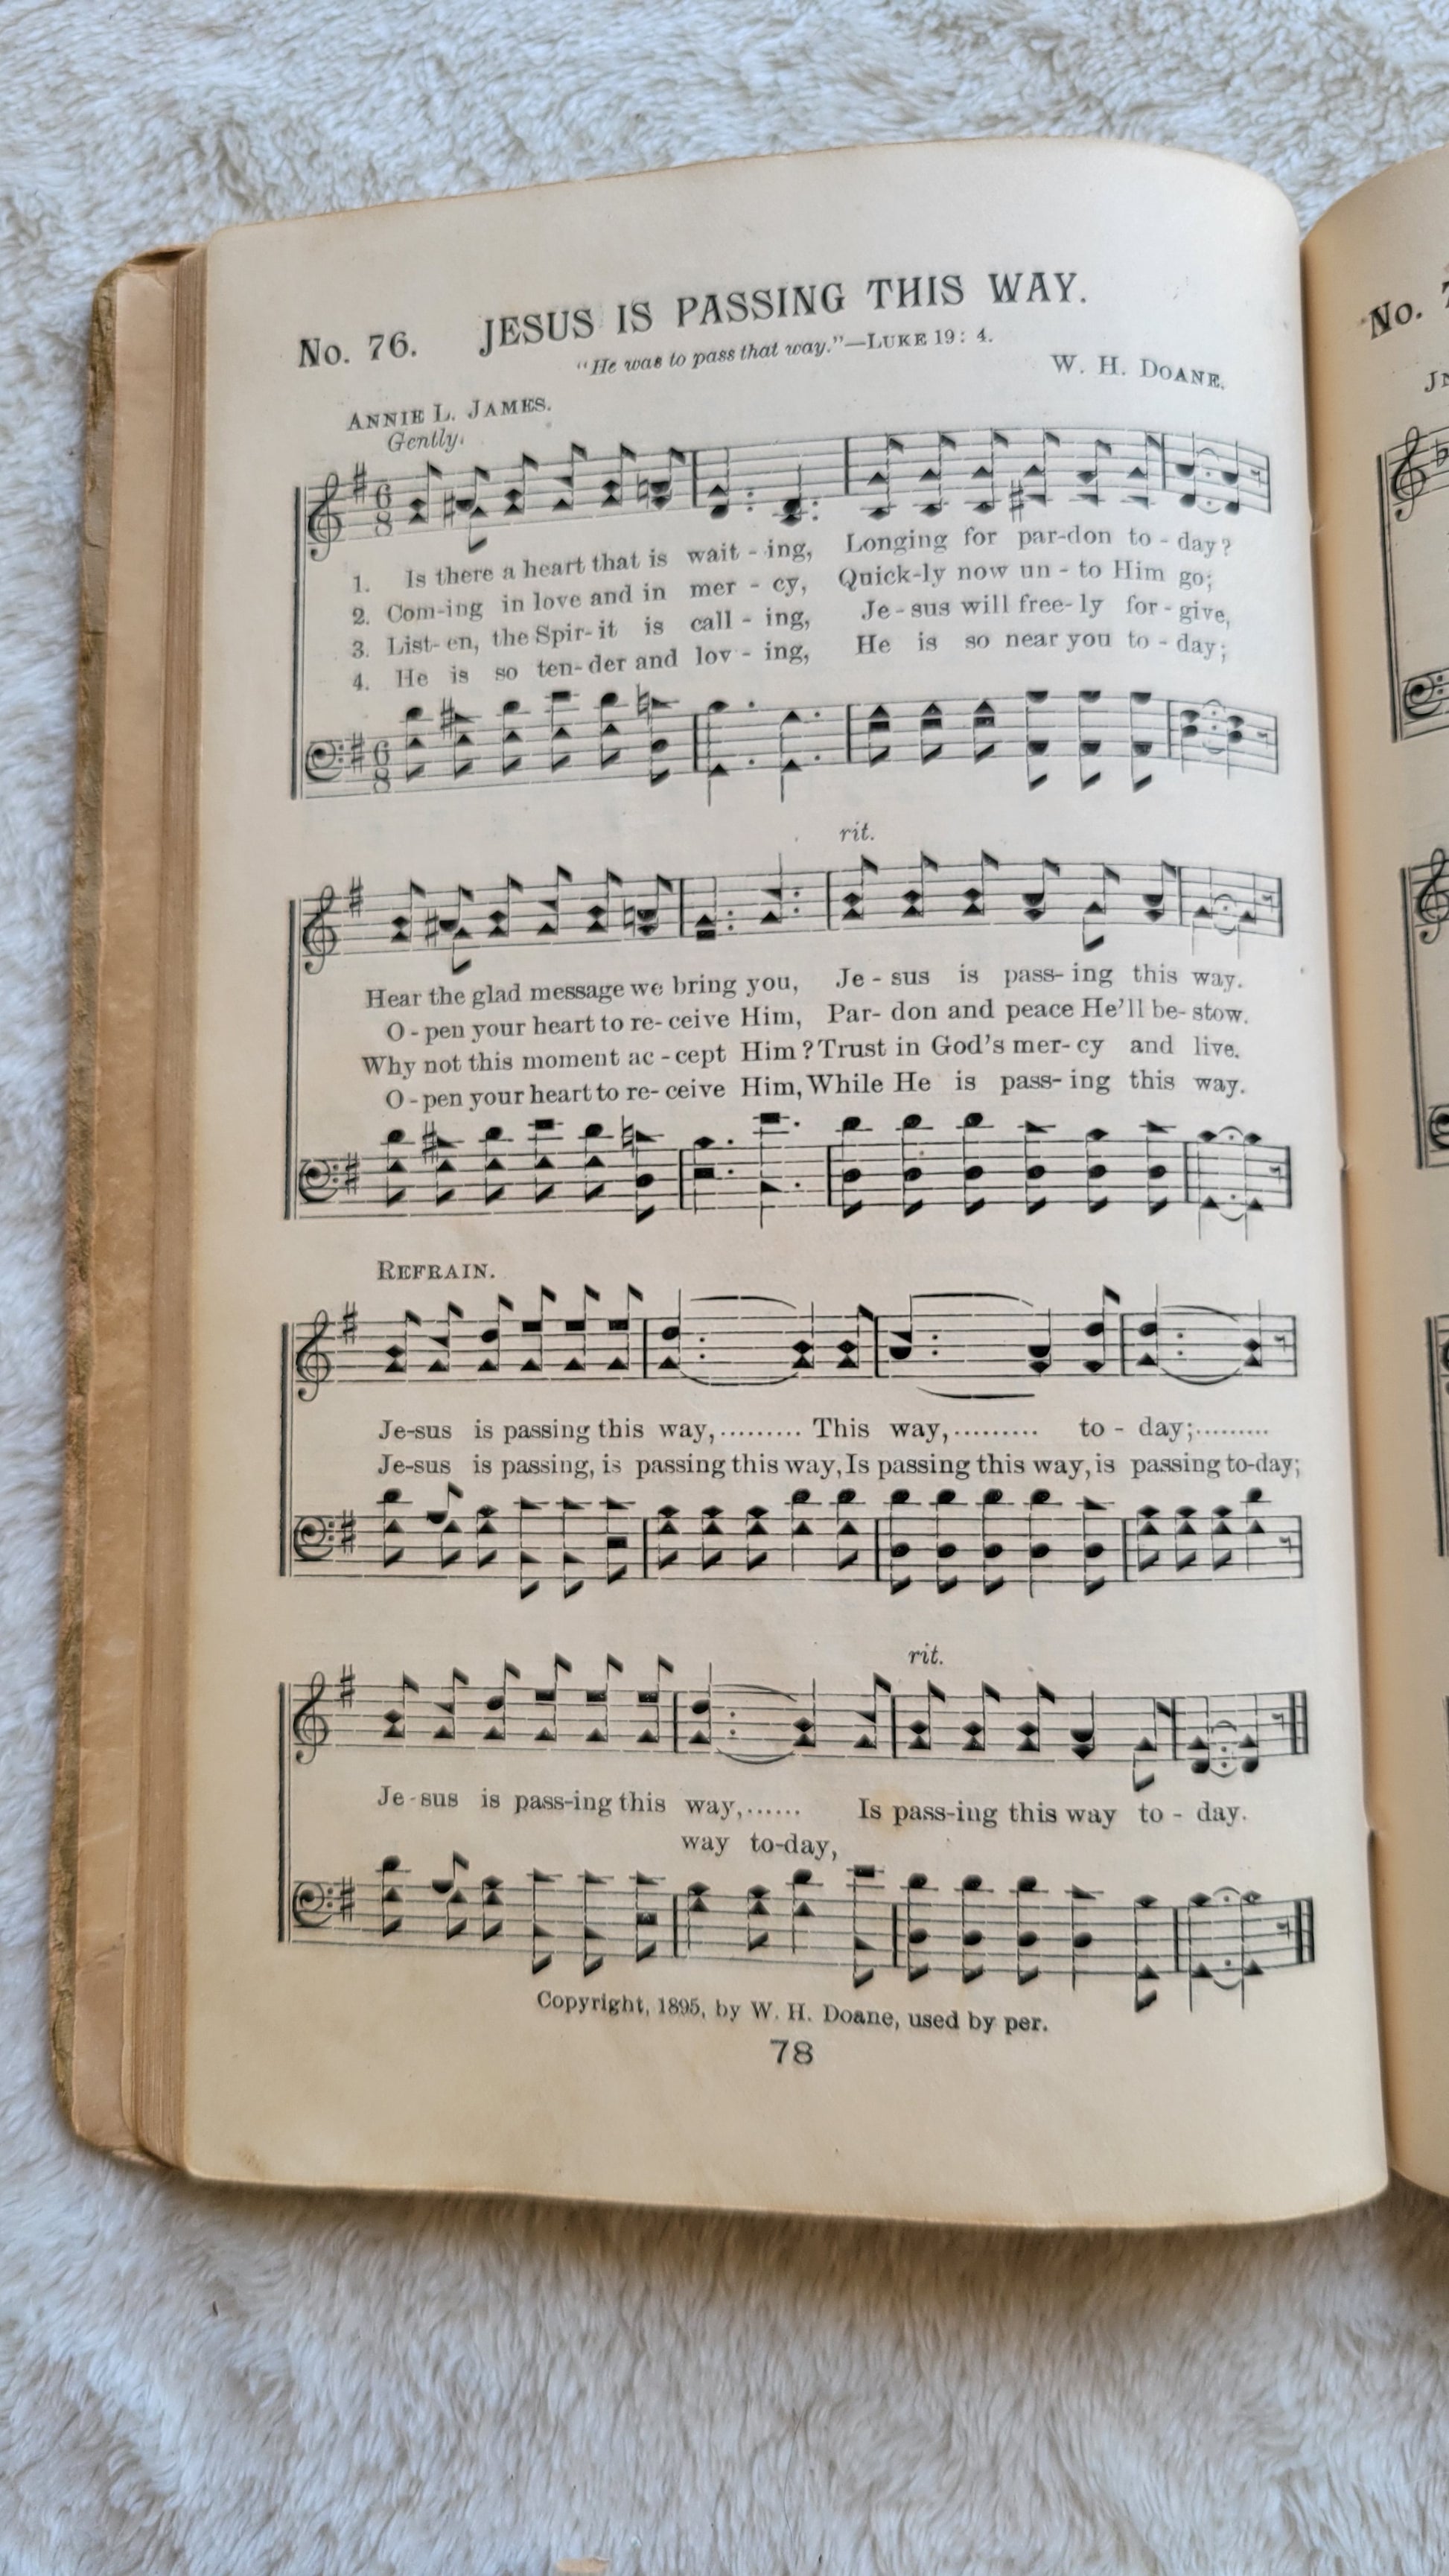 Antique book Crowning Day No. 5 is a Christian hymn book, copyrighted in 1902 by J. H. Hall, W. H. Ruebush, and J. H. Ruebush and published by the Ruebush-Kieffer Company, Dayton, Virginia.  View of song no. 76 Jesus is Passing This Way.